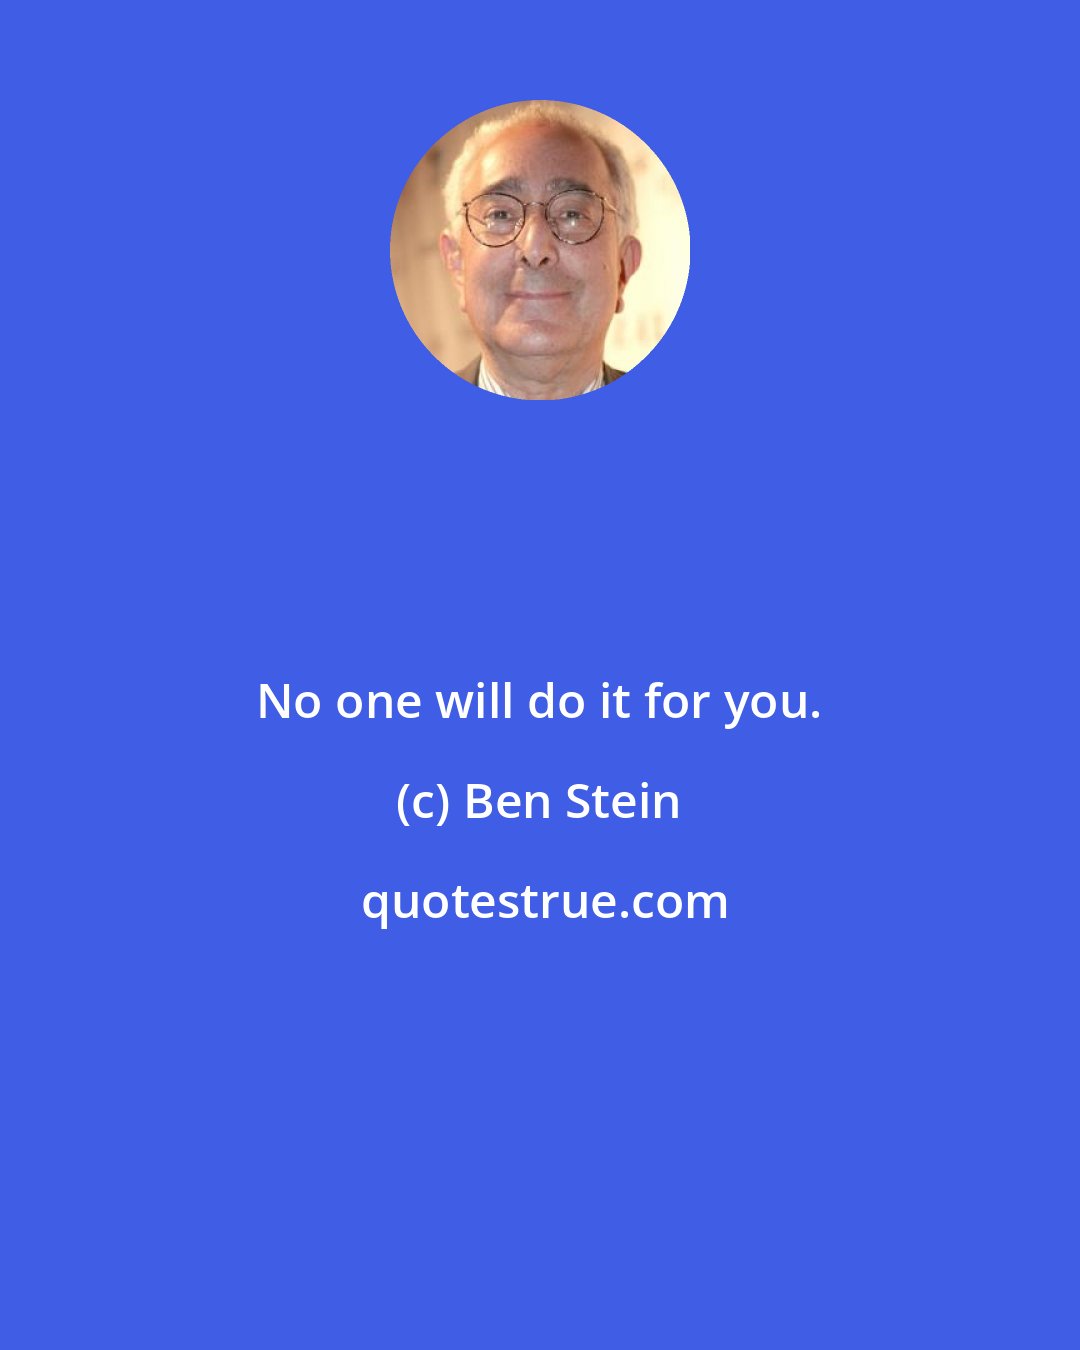 Ben Stein: No one will do it for you.